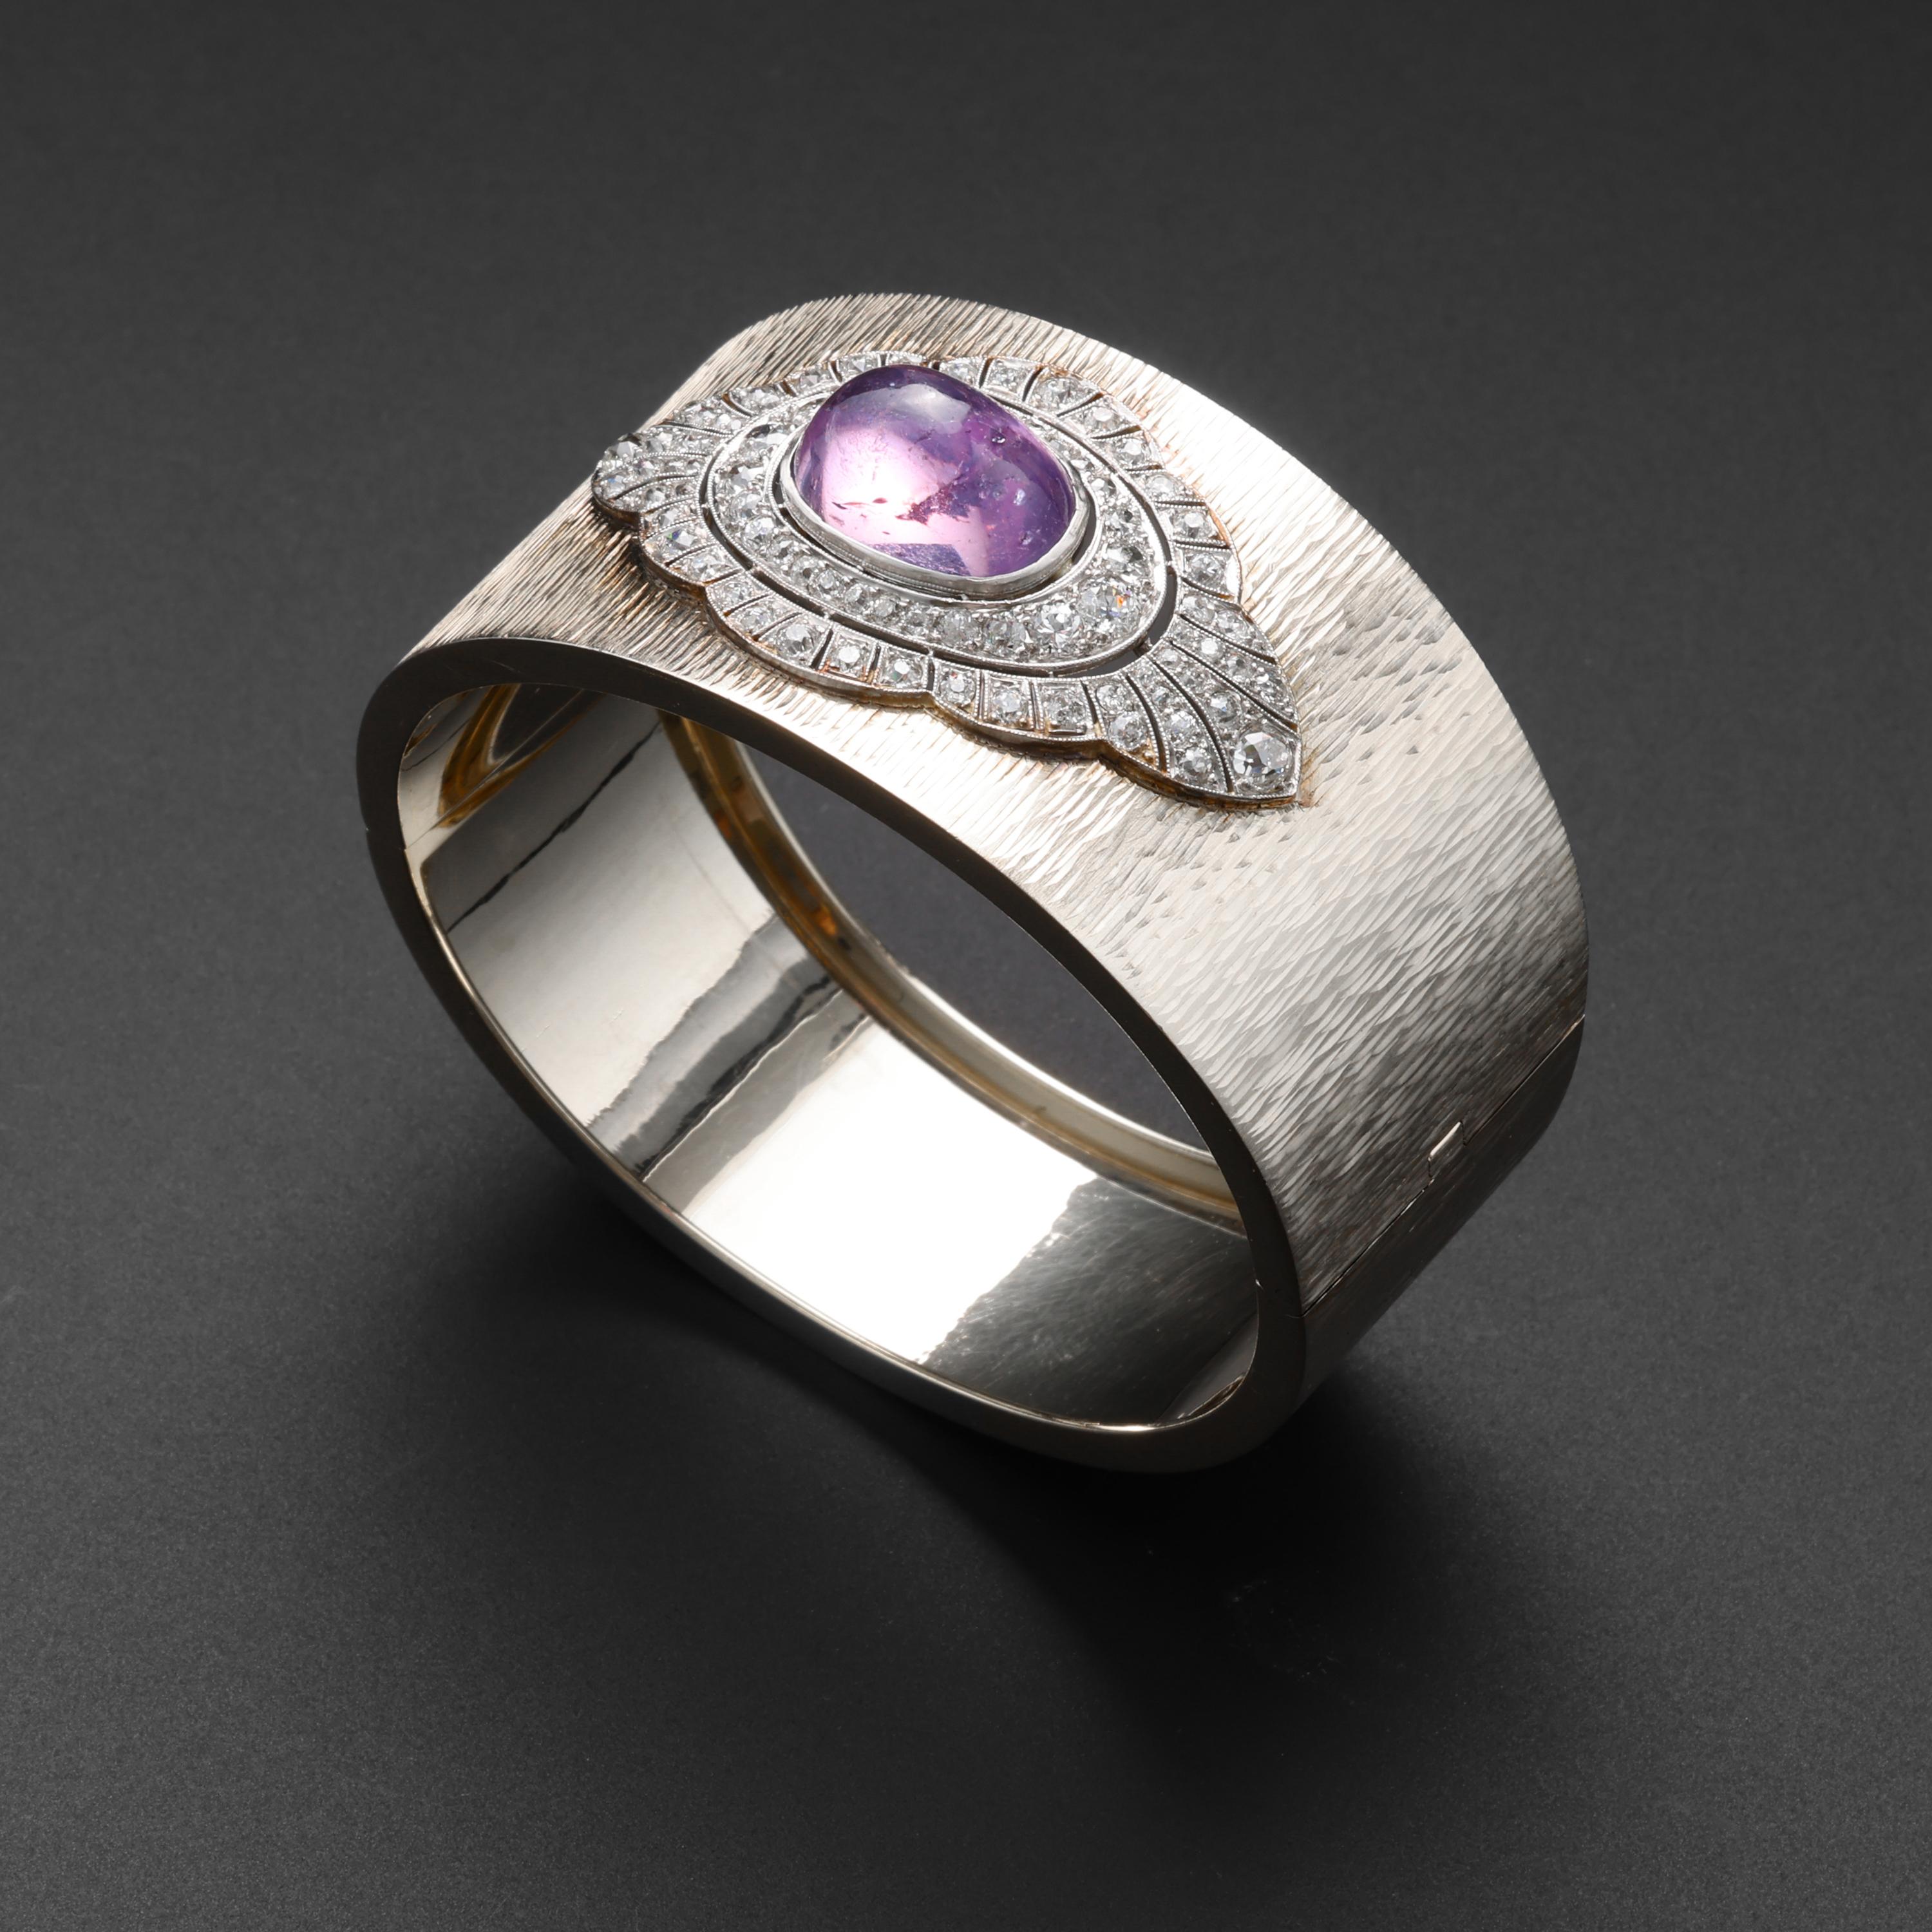 This glamorous and one-of-a-kind cuff bracelet was created by American jeweler, Marcus & Co in the 1940s. The 14K white gold cuff bracelet features an oval cabochon-cut pink-purple natural star sapphire that measures 15.66mm x 10.8mm x 8.19mm and